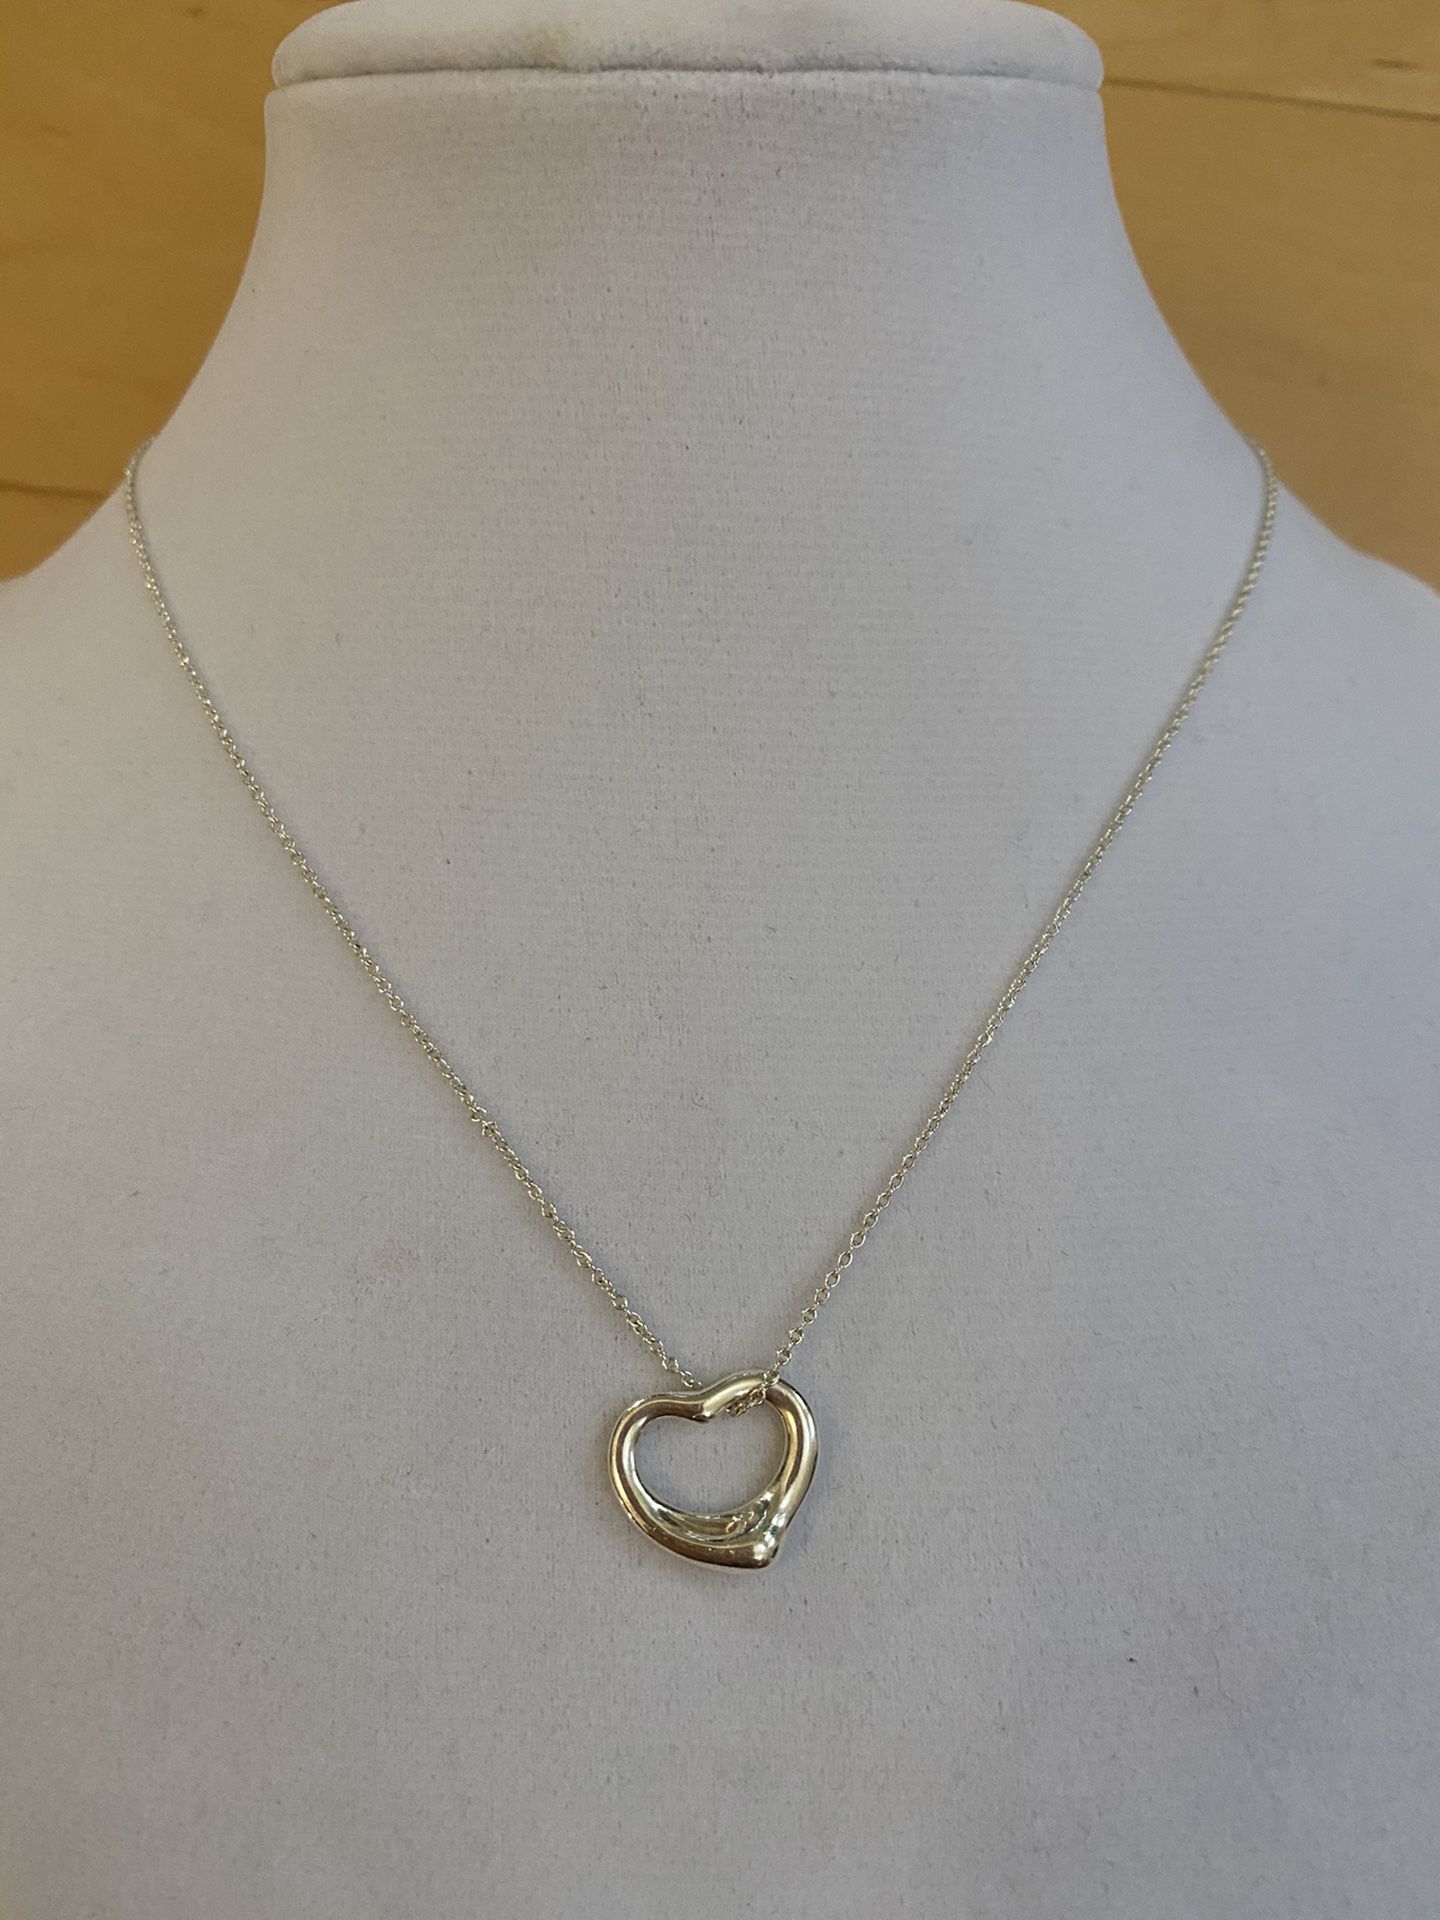 Tiffany & Co Heart necklace, like new condition